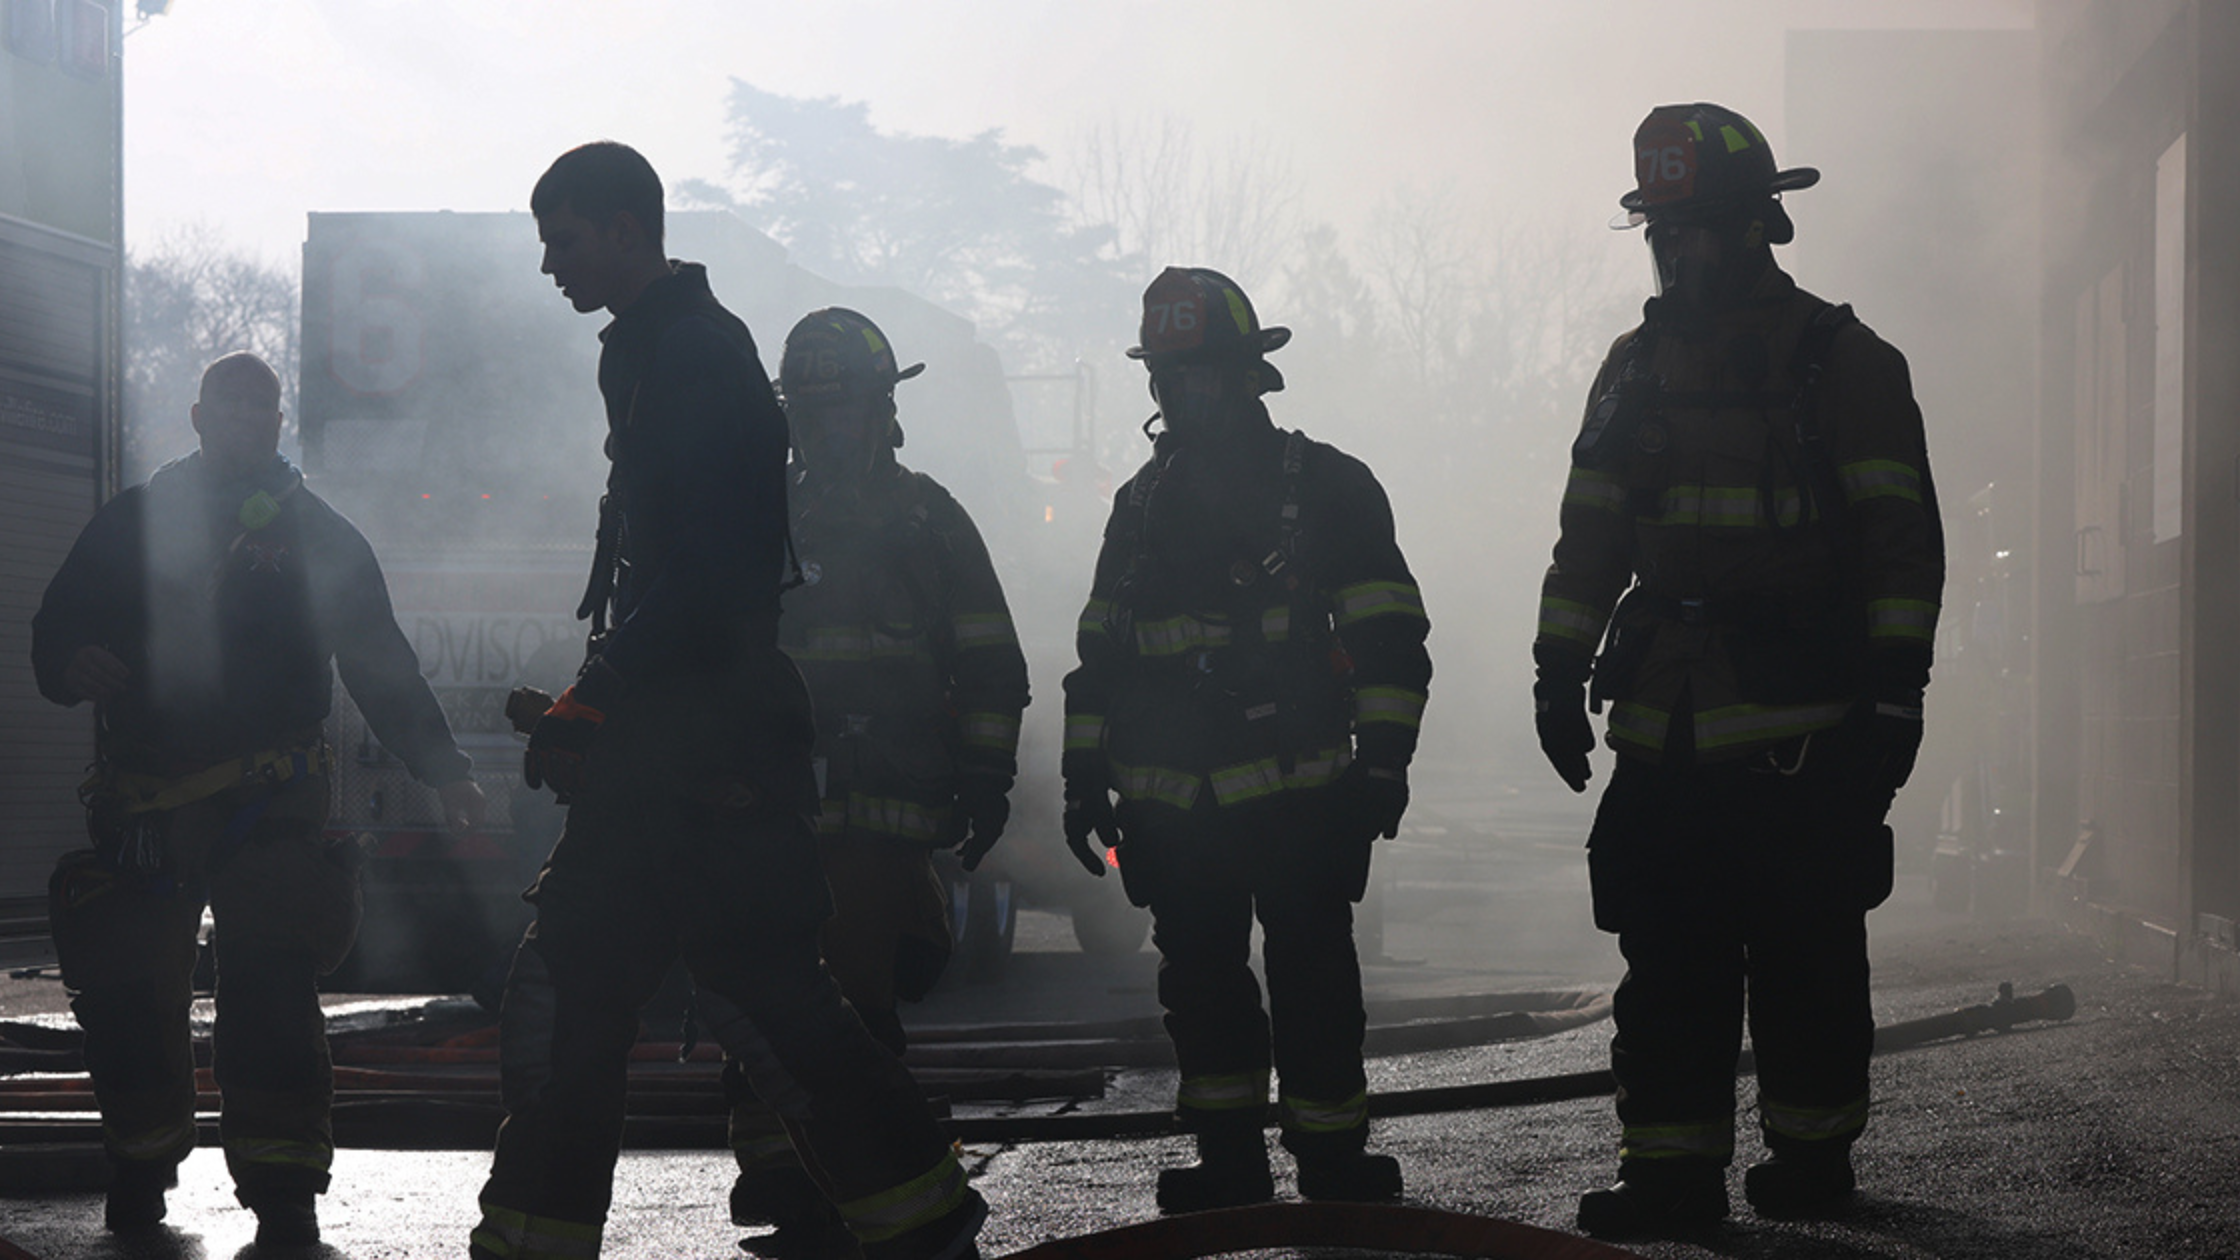 Firefighters standing in the haze after putting a fire out